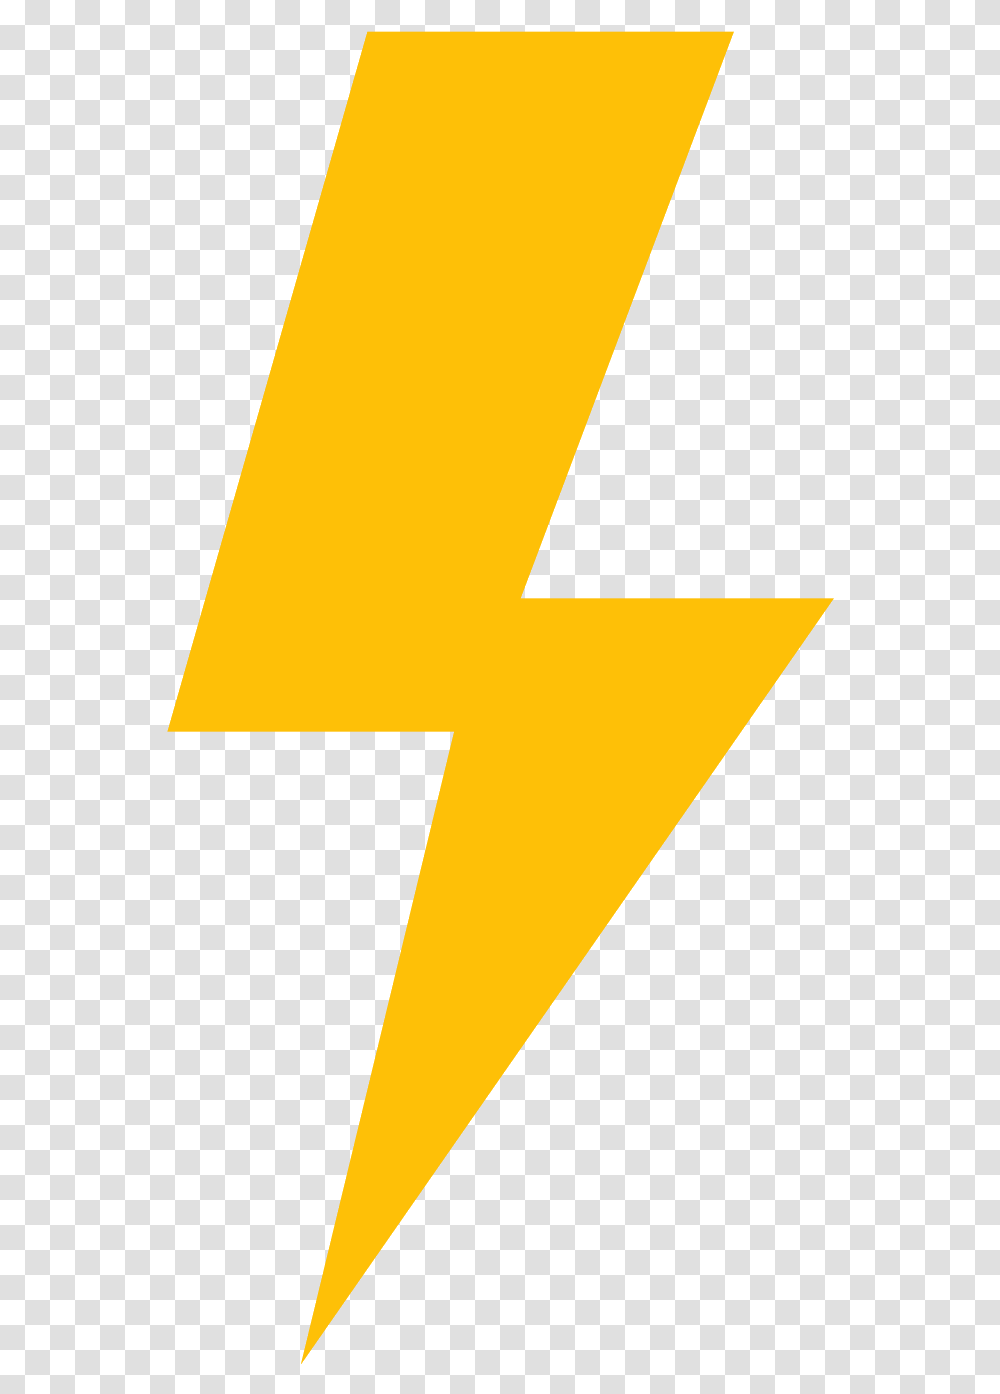 On Icon Free Download And Vector Lightning Pixel Art, Logo, Trademark Transparent Png